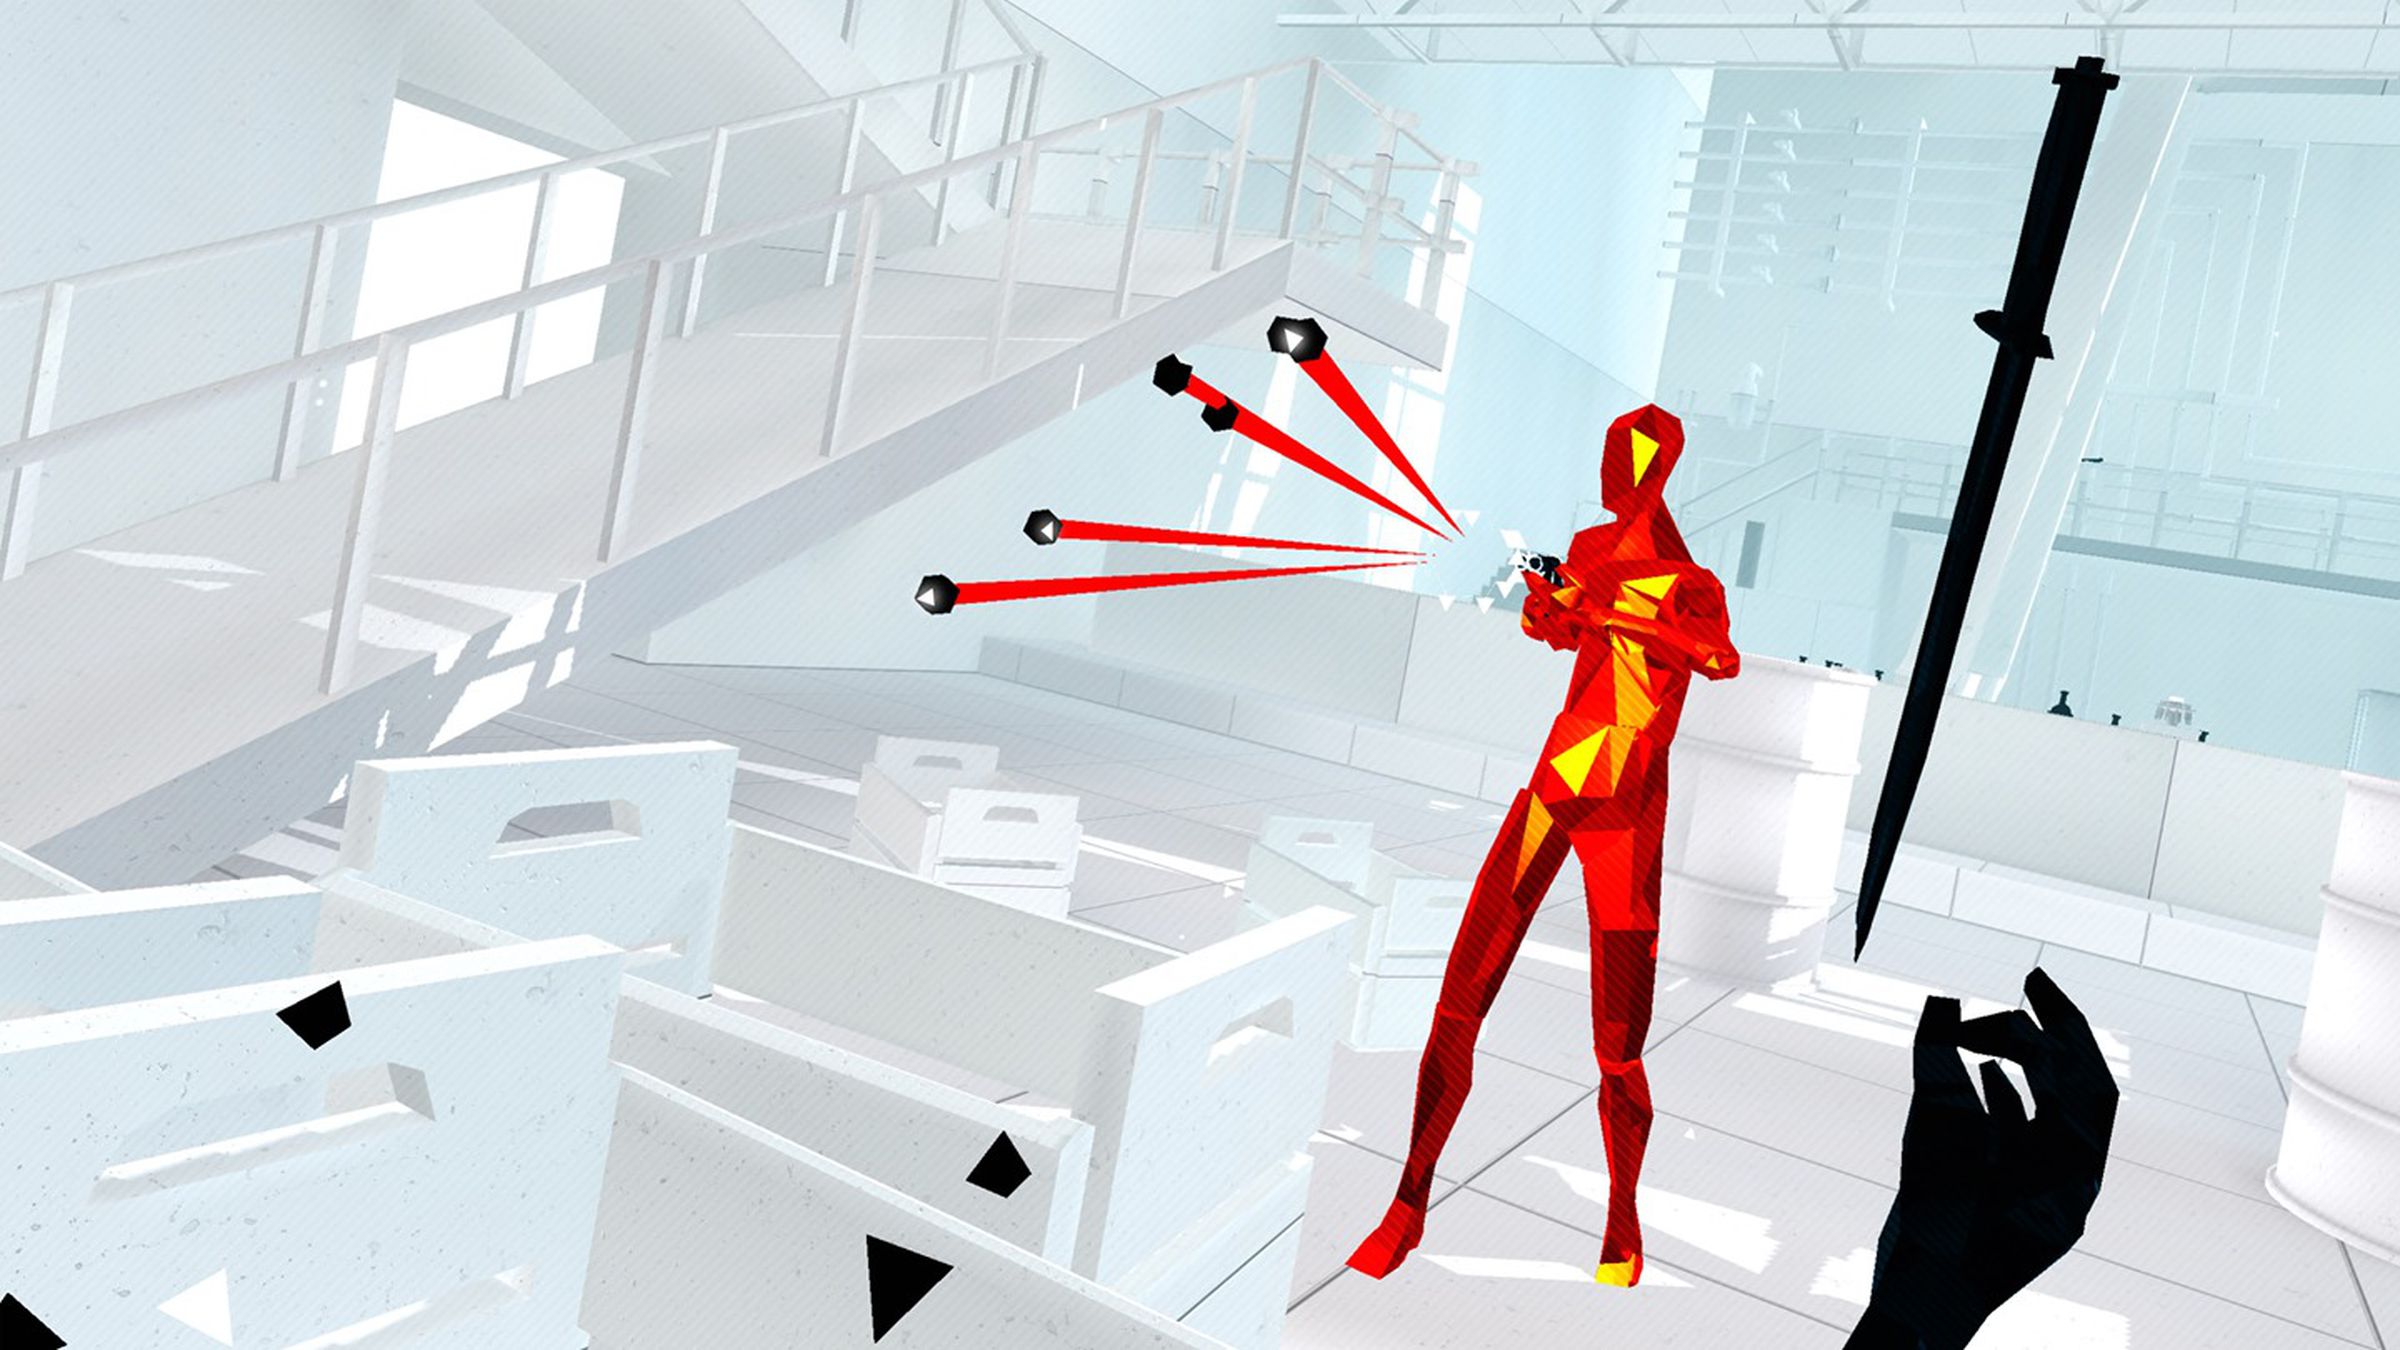 Human figure in red and yellow sends out red and black rays while a hand reaches for a black sword within a while office background.